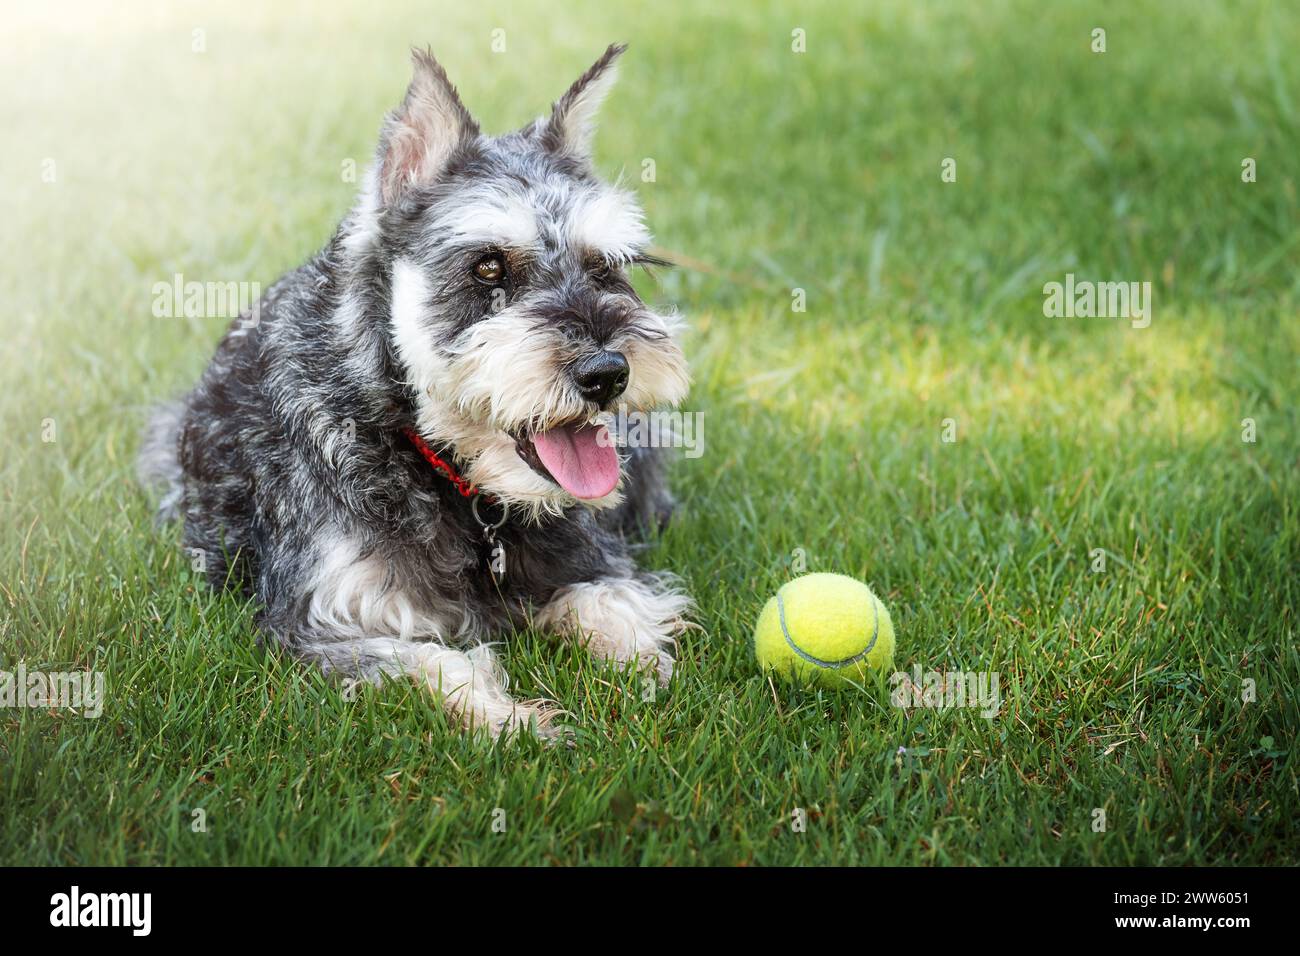 Miniature schnauzer dog lying on the grass with a tennis ball in the backyard Stock Photo